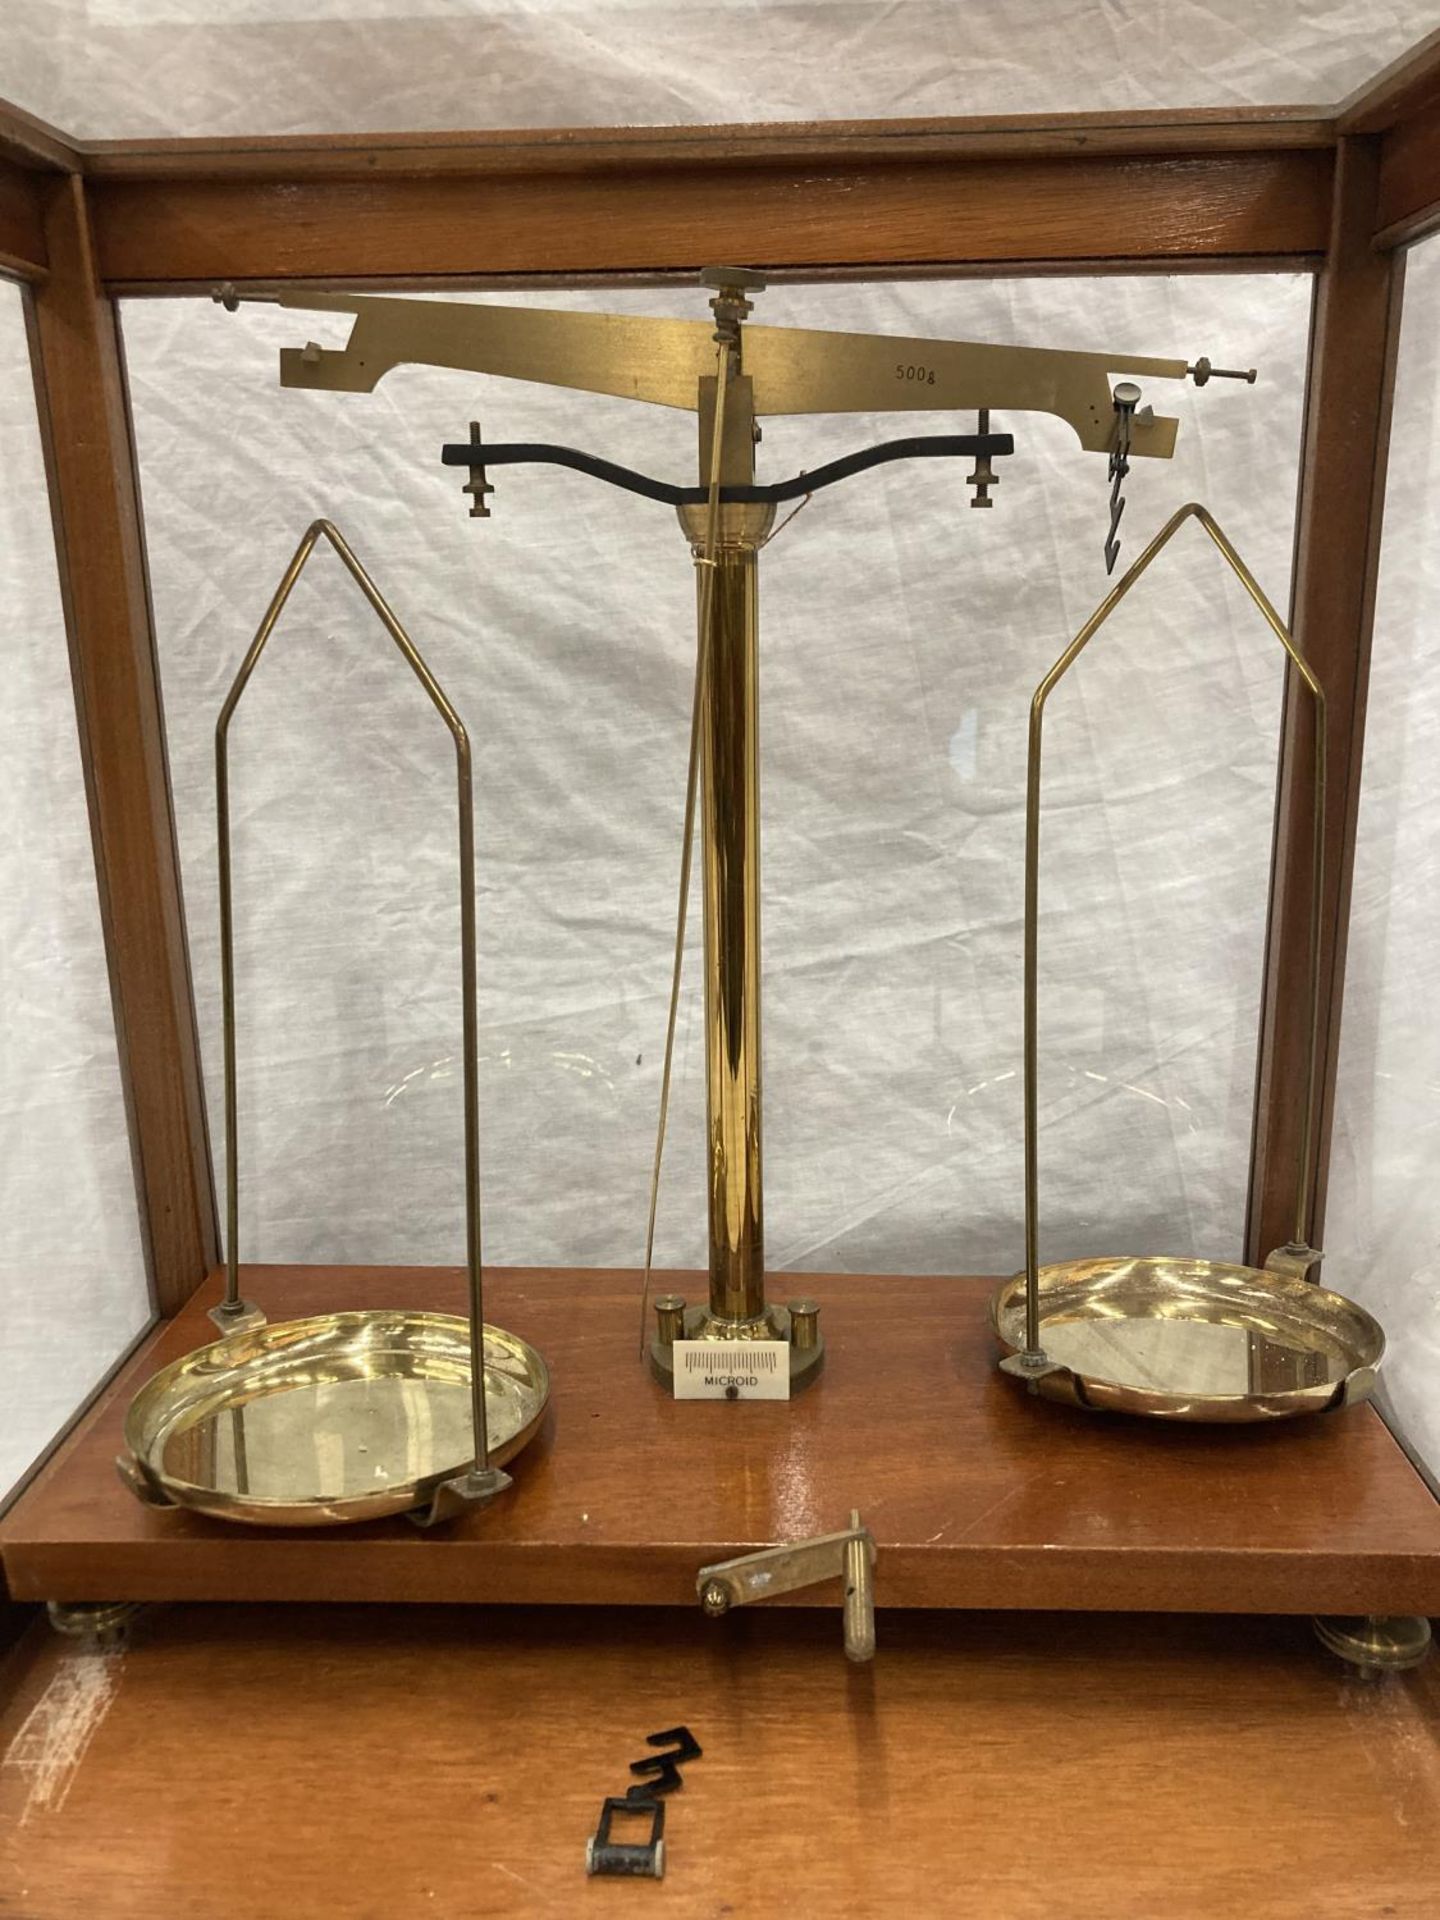 A GRIFFIN AND GEORGE LTD SET OF MICROID SCIENTIFIC SCALES IN A MAHOGANY CASE WITH GLASS PANELS - - Image 4 of 7